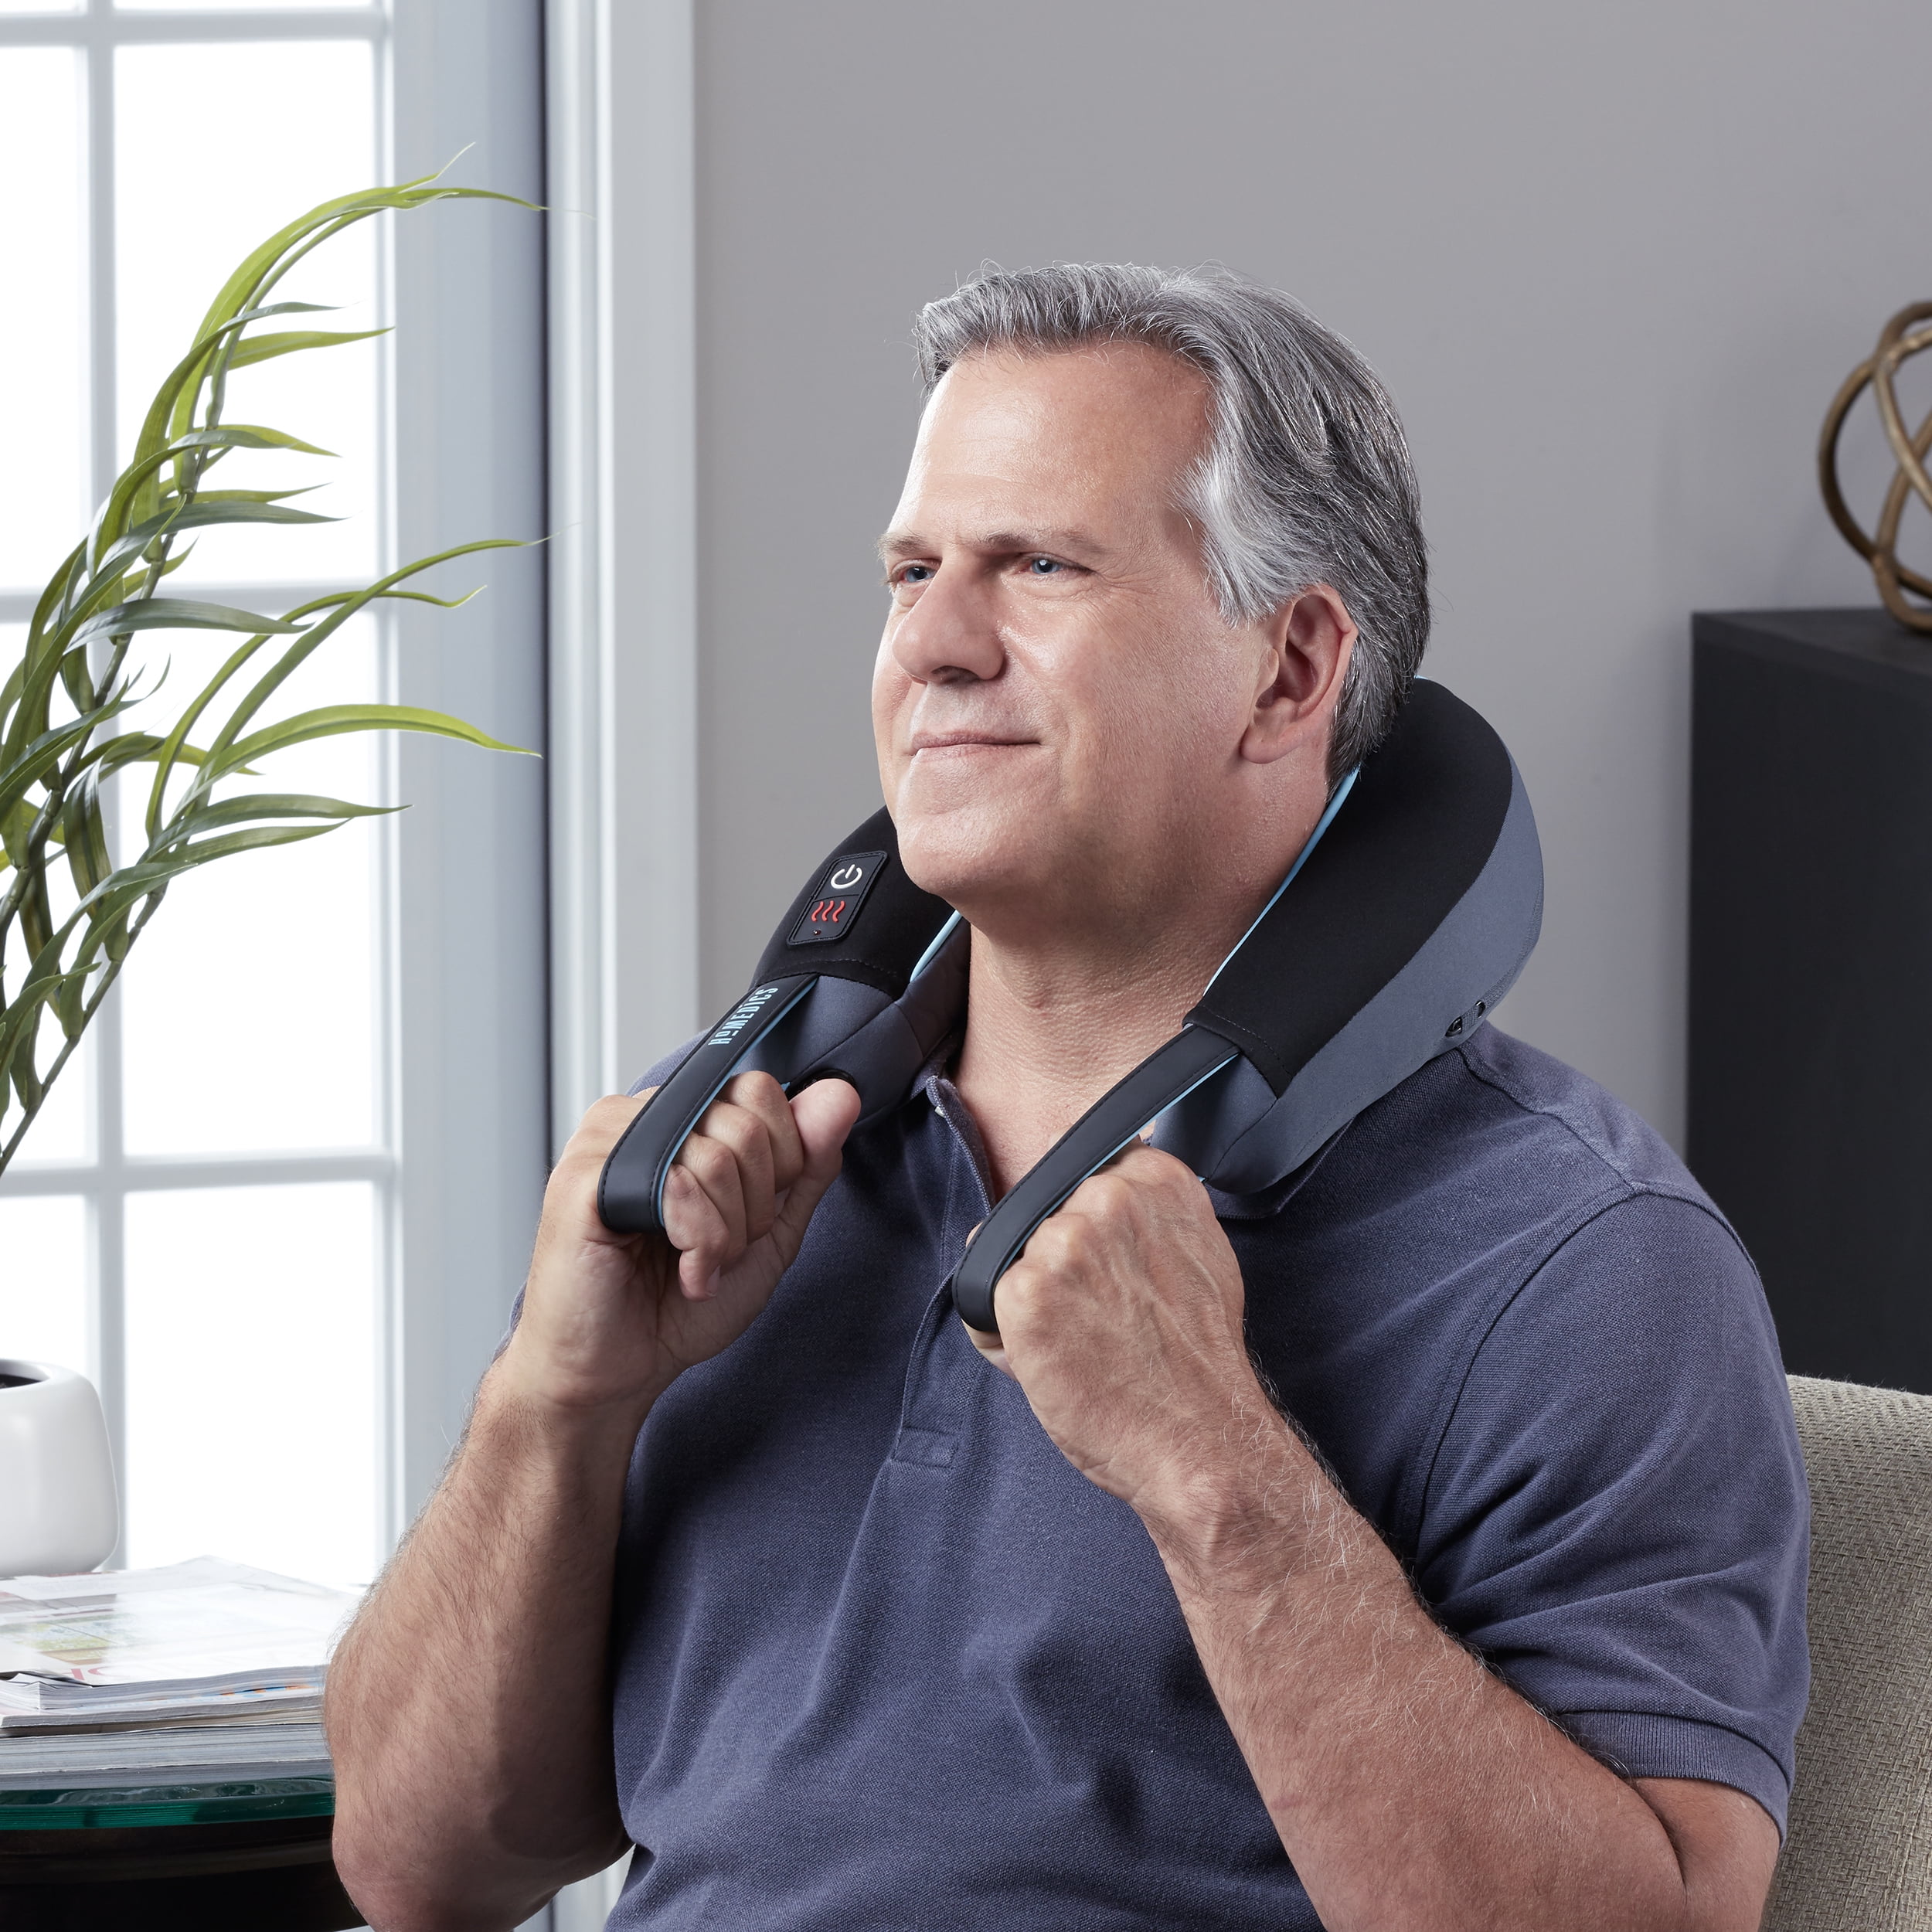 NEW HOMEDICS VIBRATING NECK MASSAGER SOOTHING WITH HEAT